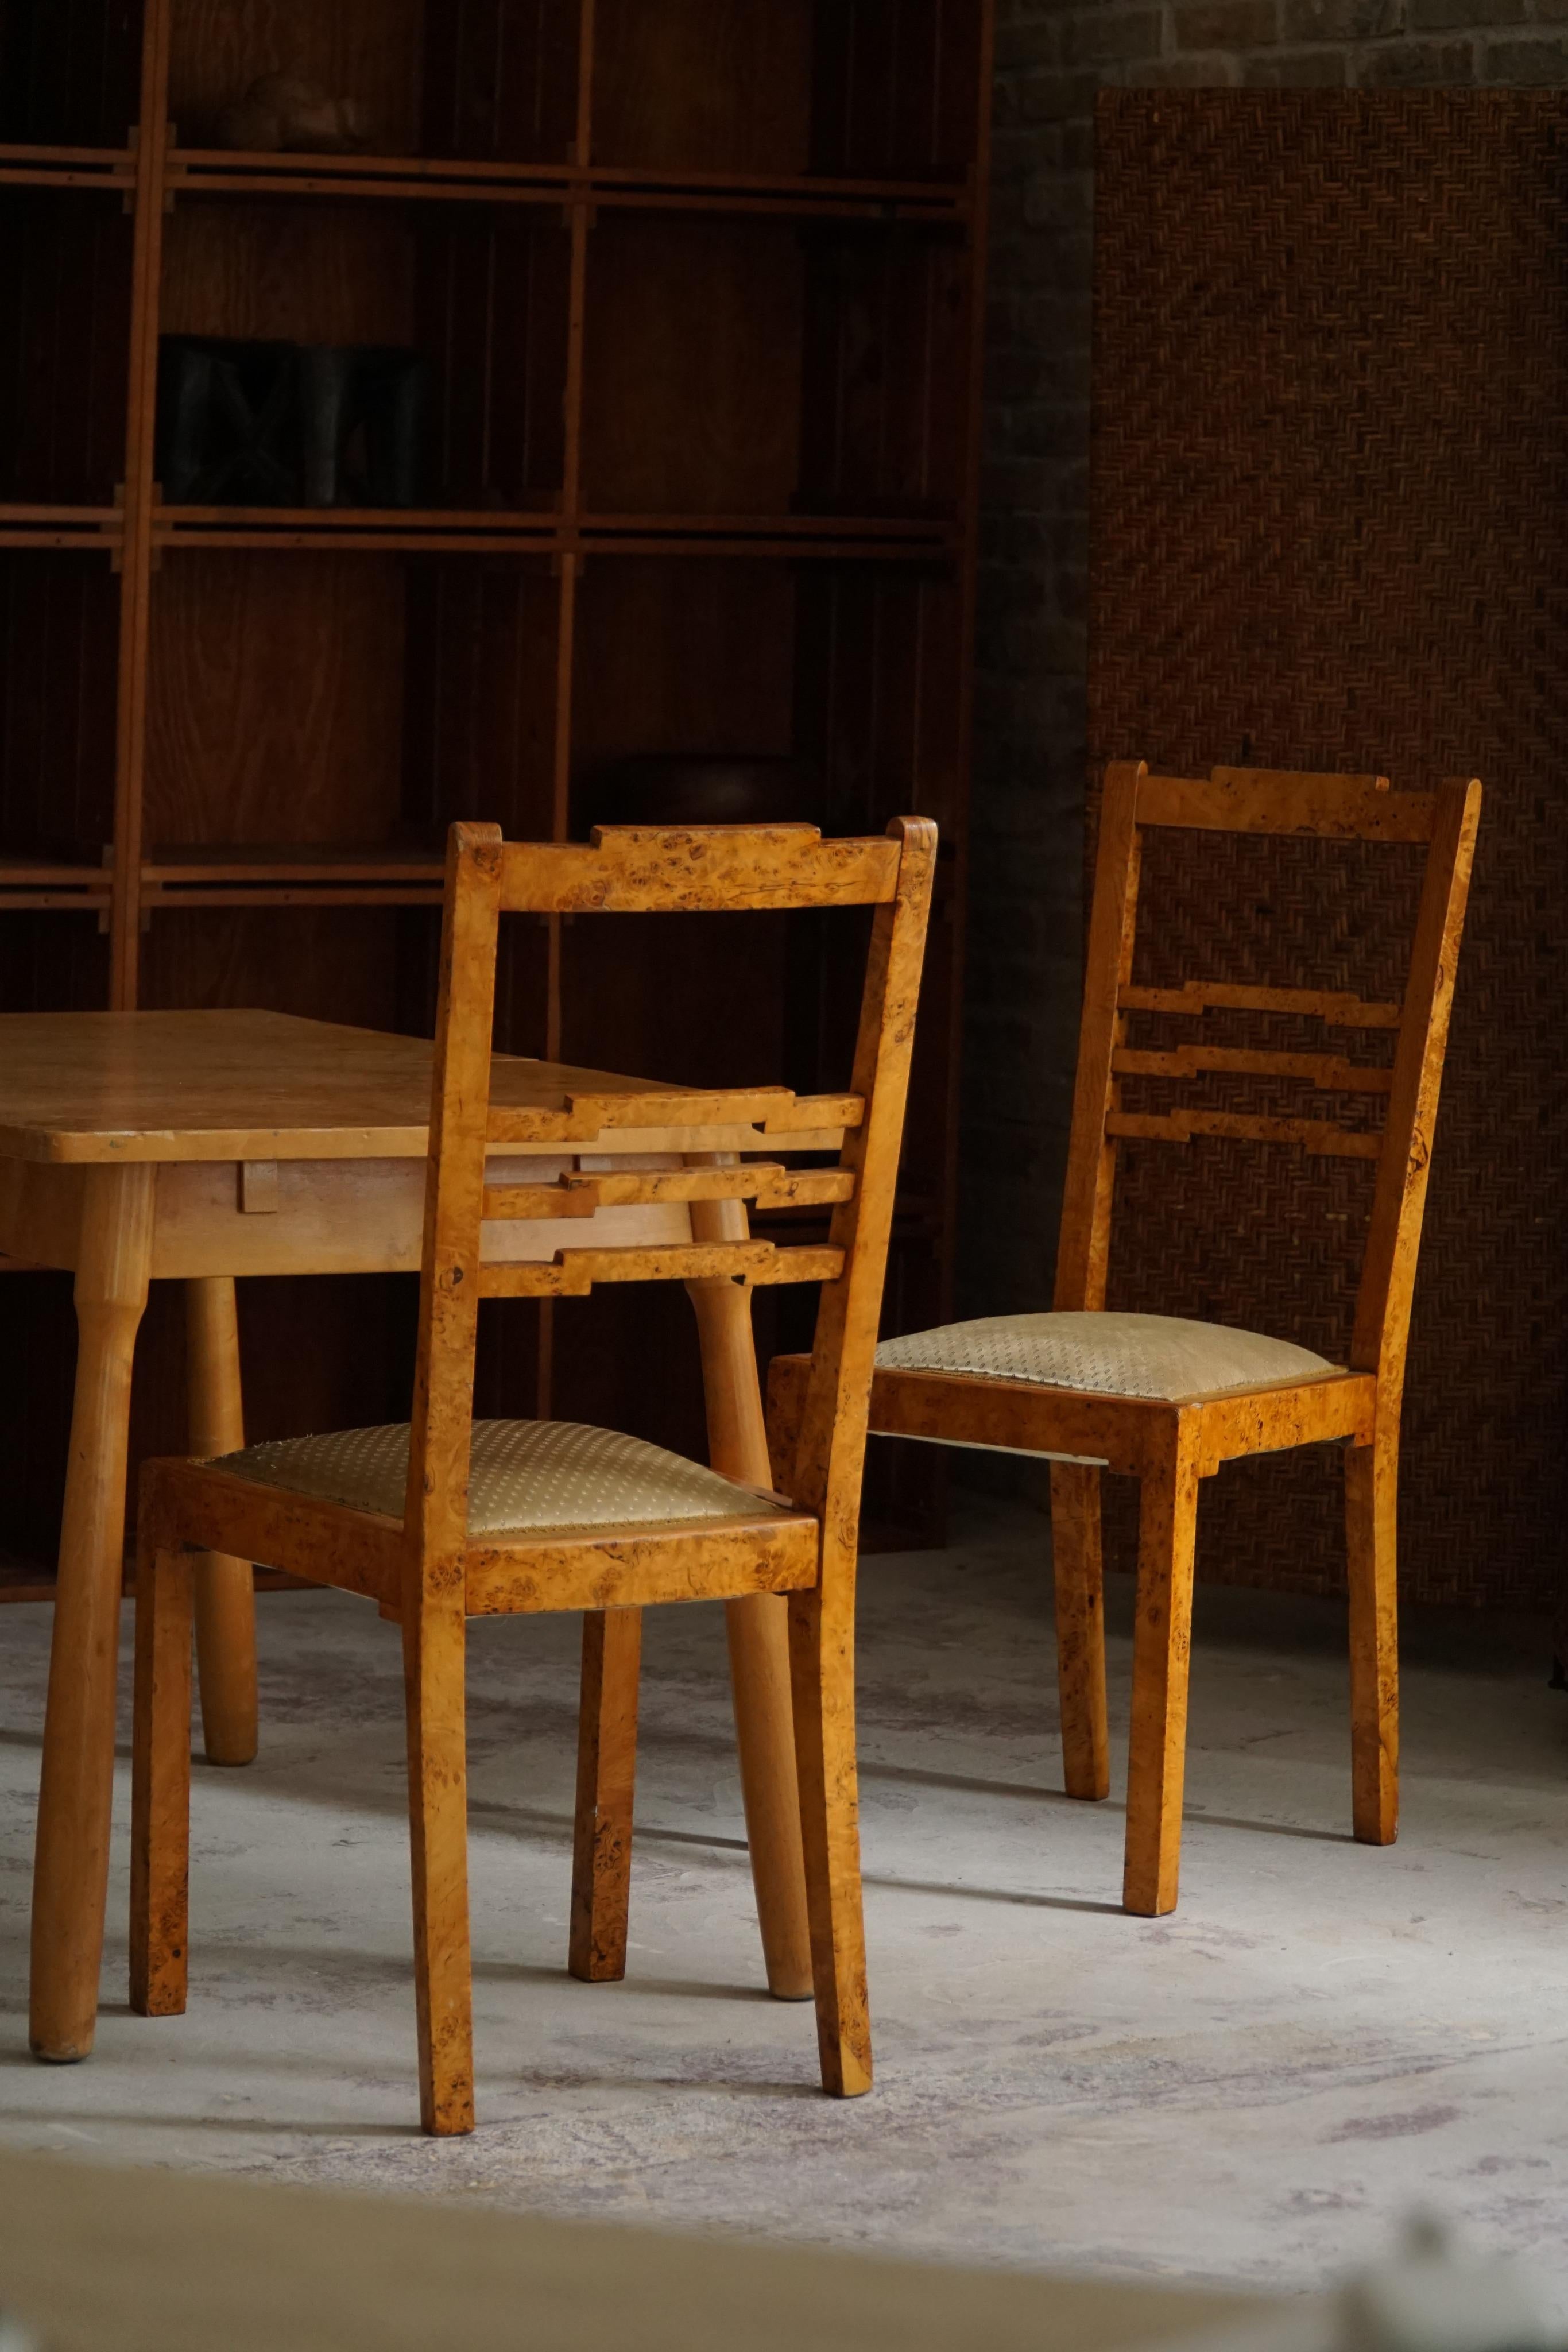 A Pair of Swedish Art Deco Dining Room Chairs in Birch, 1920s For Sale 11